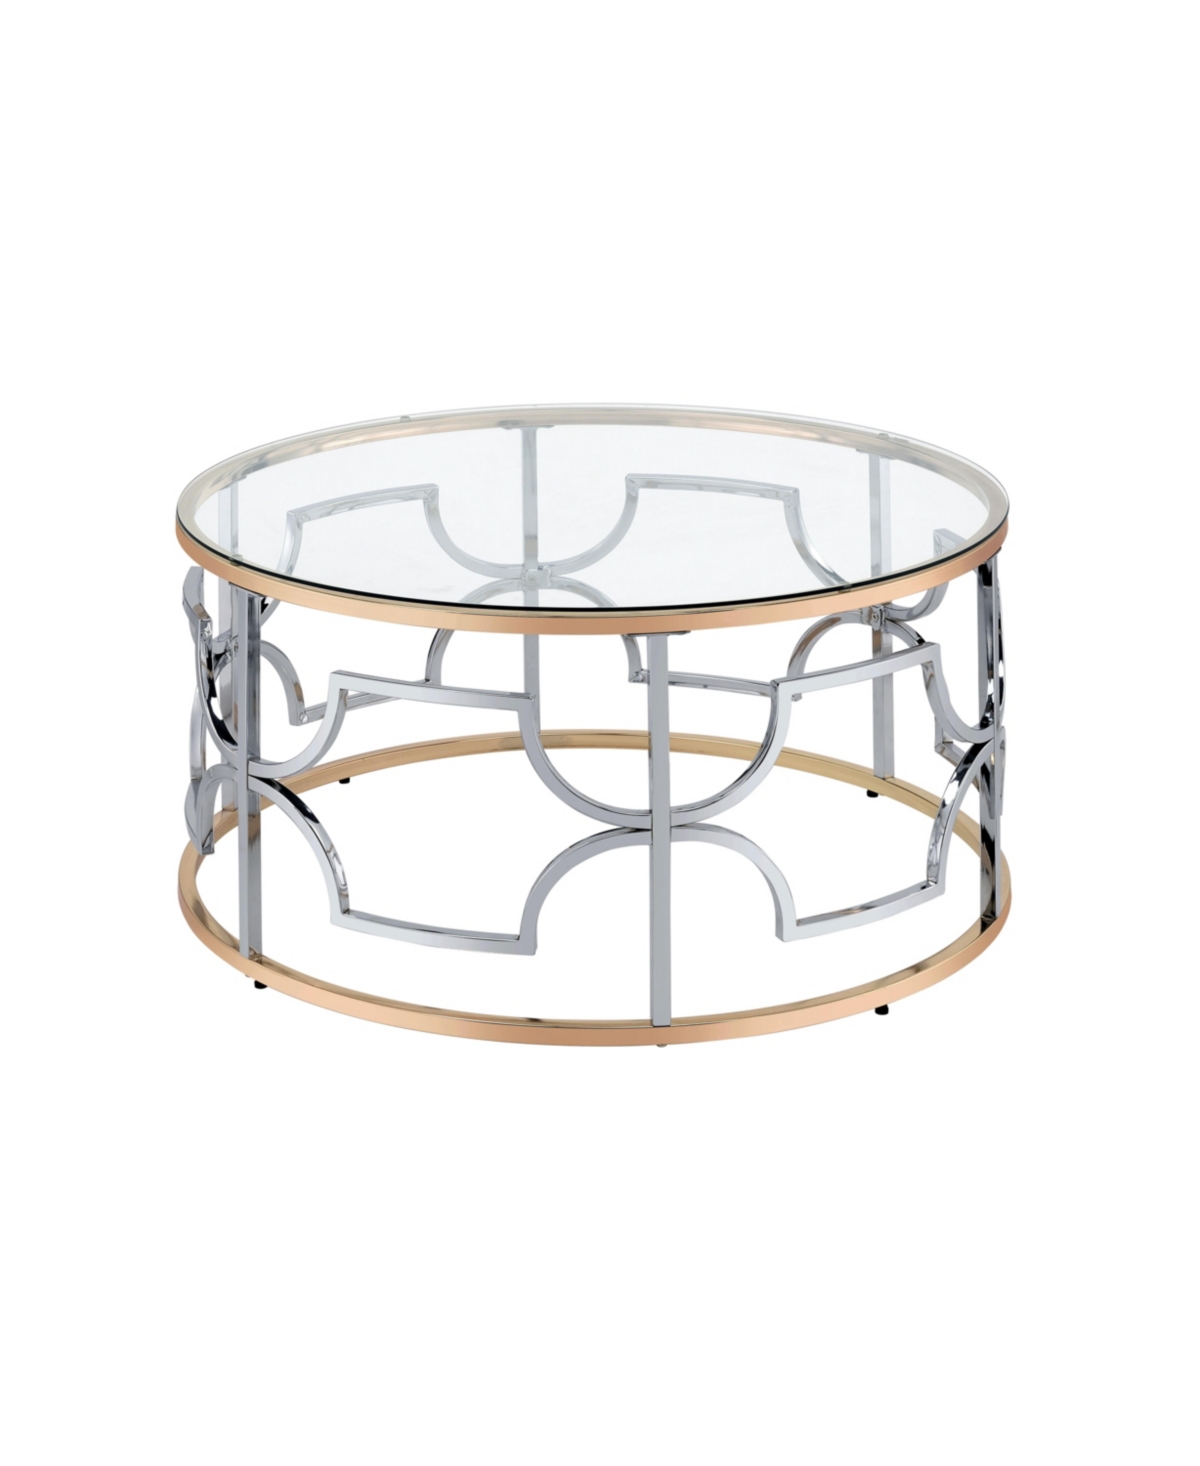 Furniture Of America 36" Metal, Glass Camille Modern Round Glass Top Coffee Table In Chrome And Gold